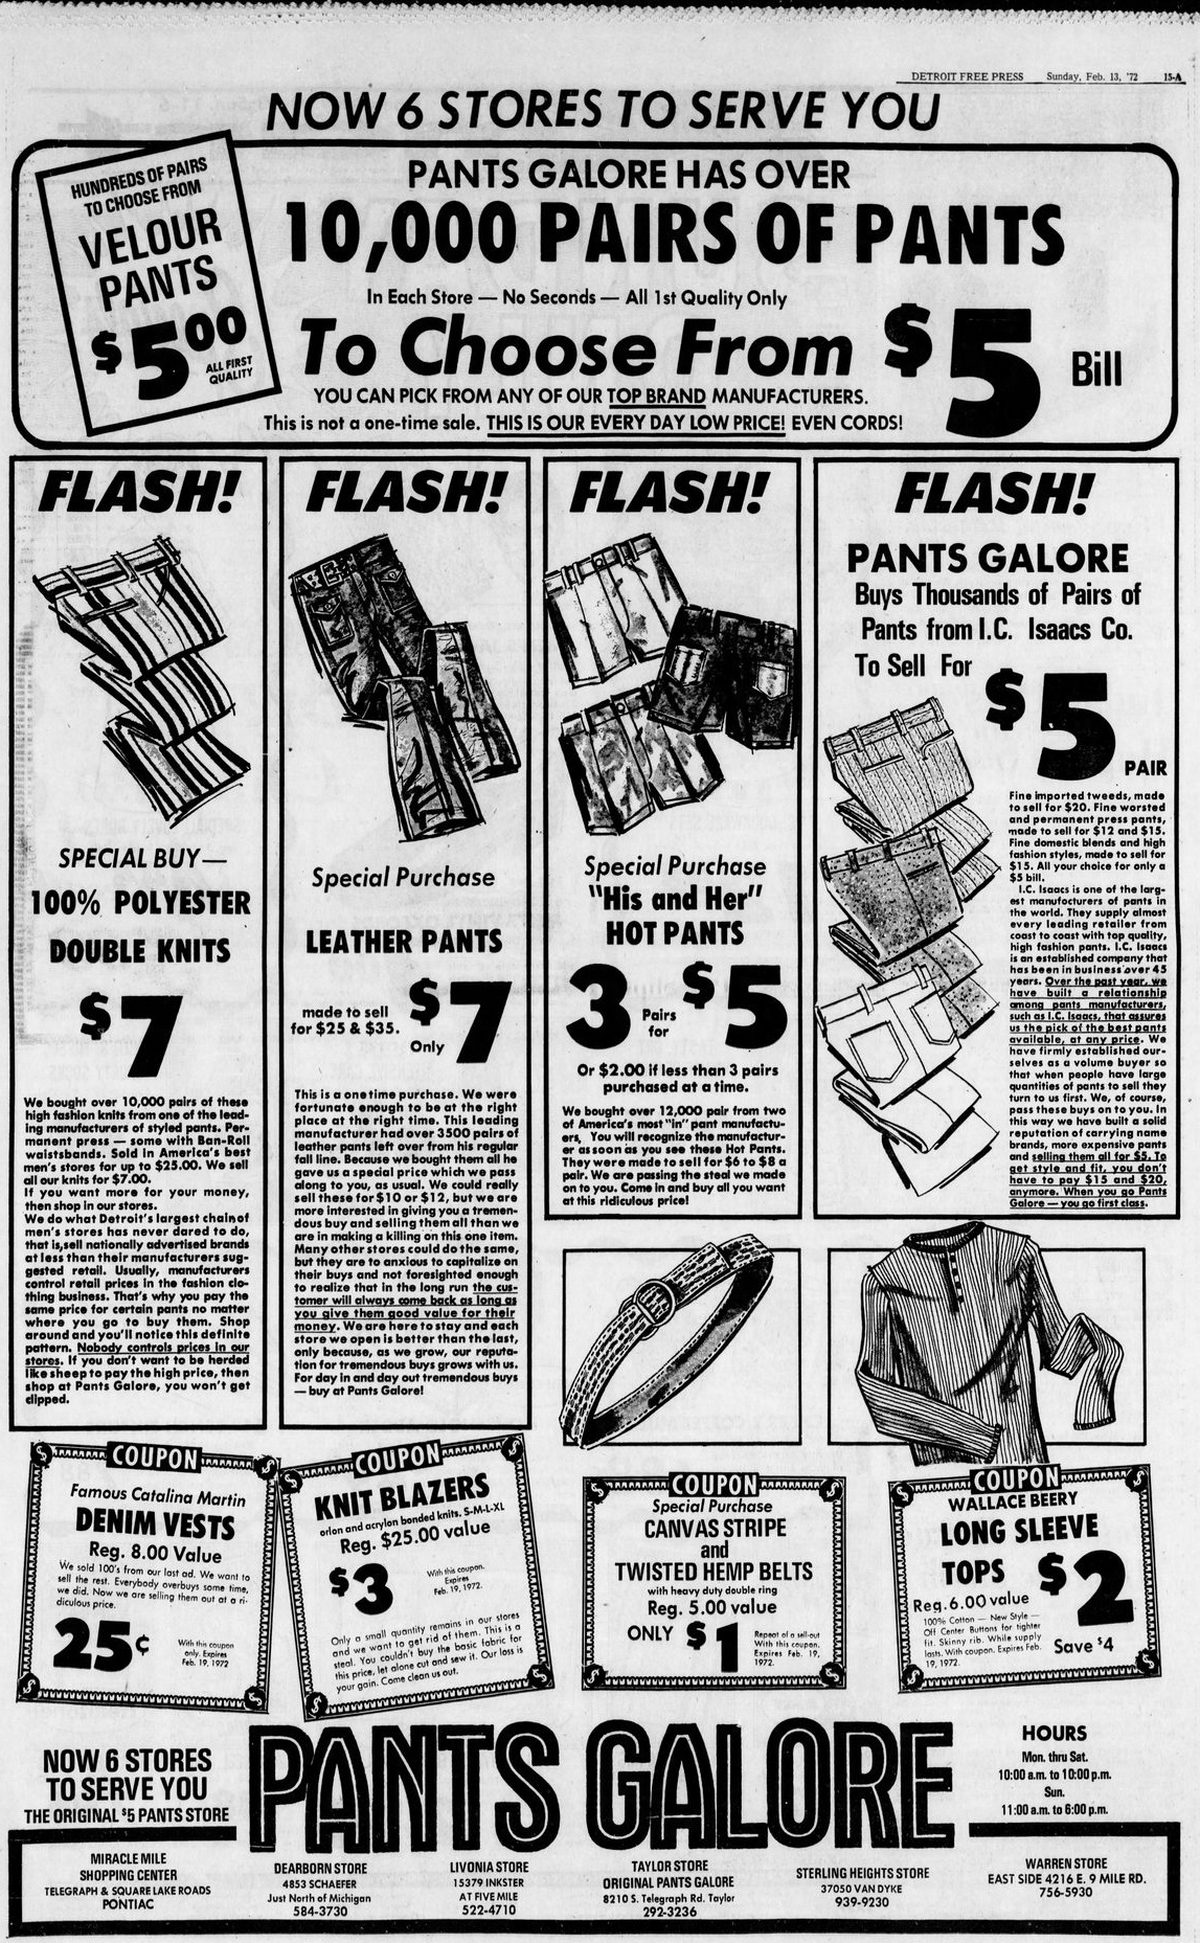 Pants Galore - Frb 1972 Full Page Ad With Store Locations